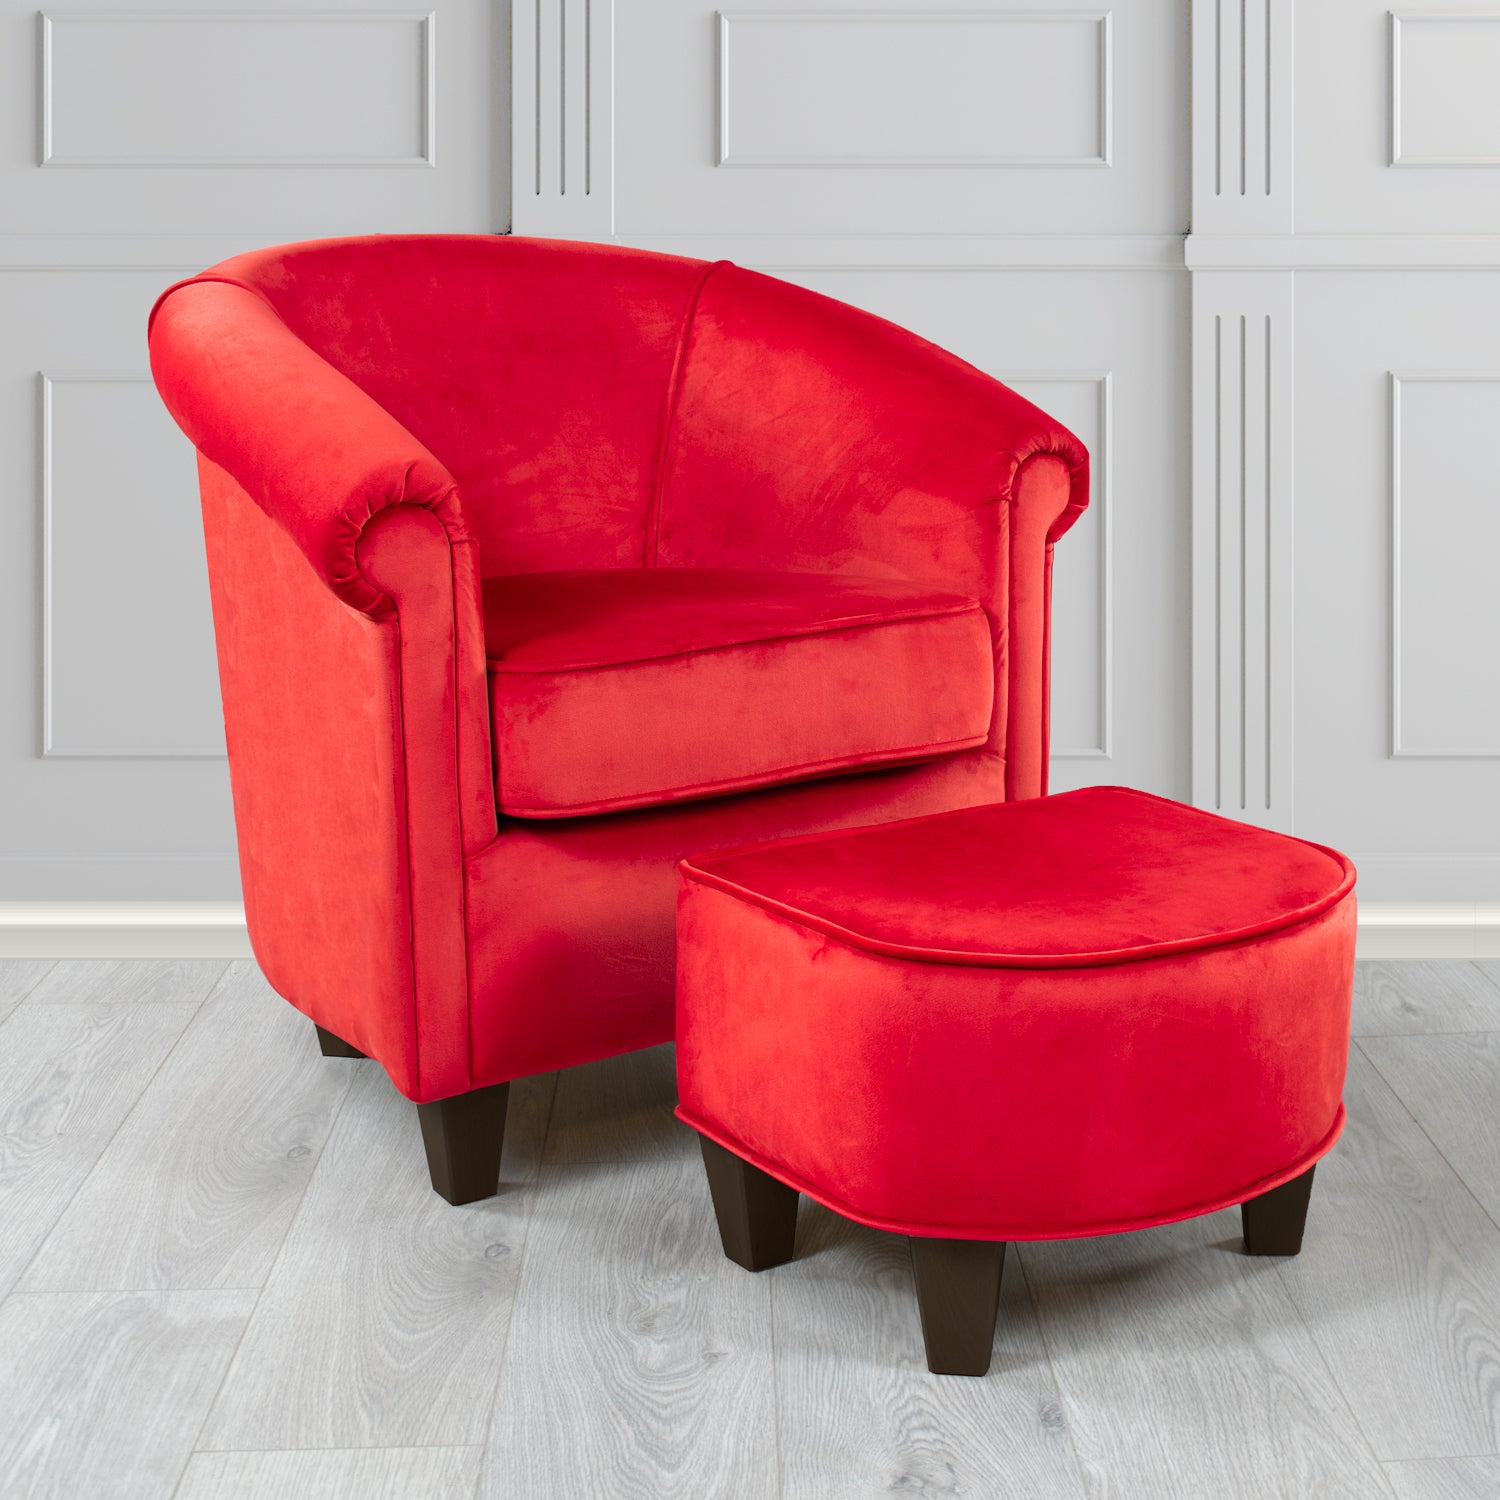 Siena Passione Flame PAS2712 Velvet Fabric Tub Chair & Footstool Set (4680410824746)